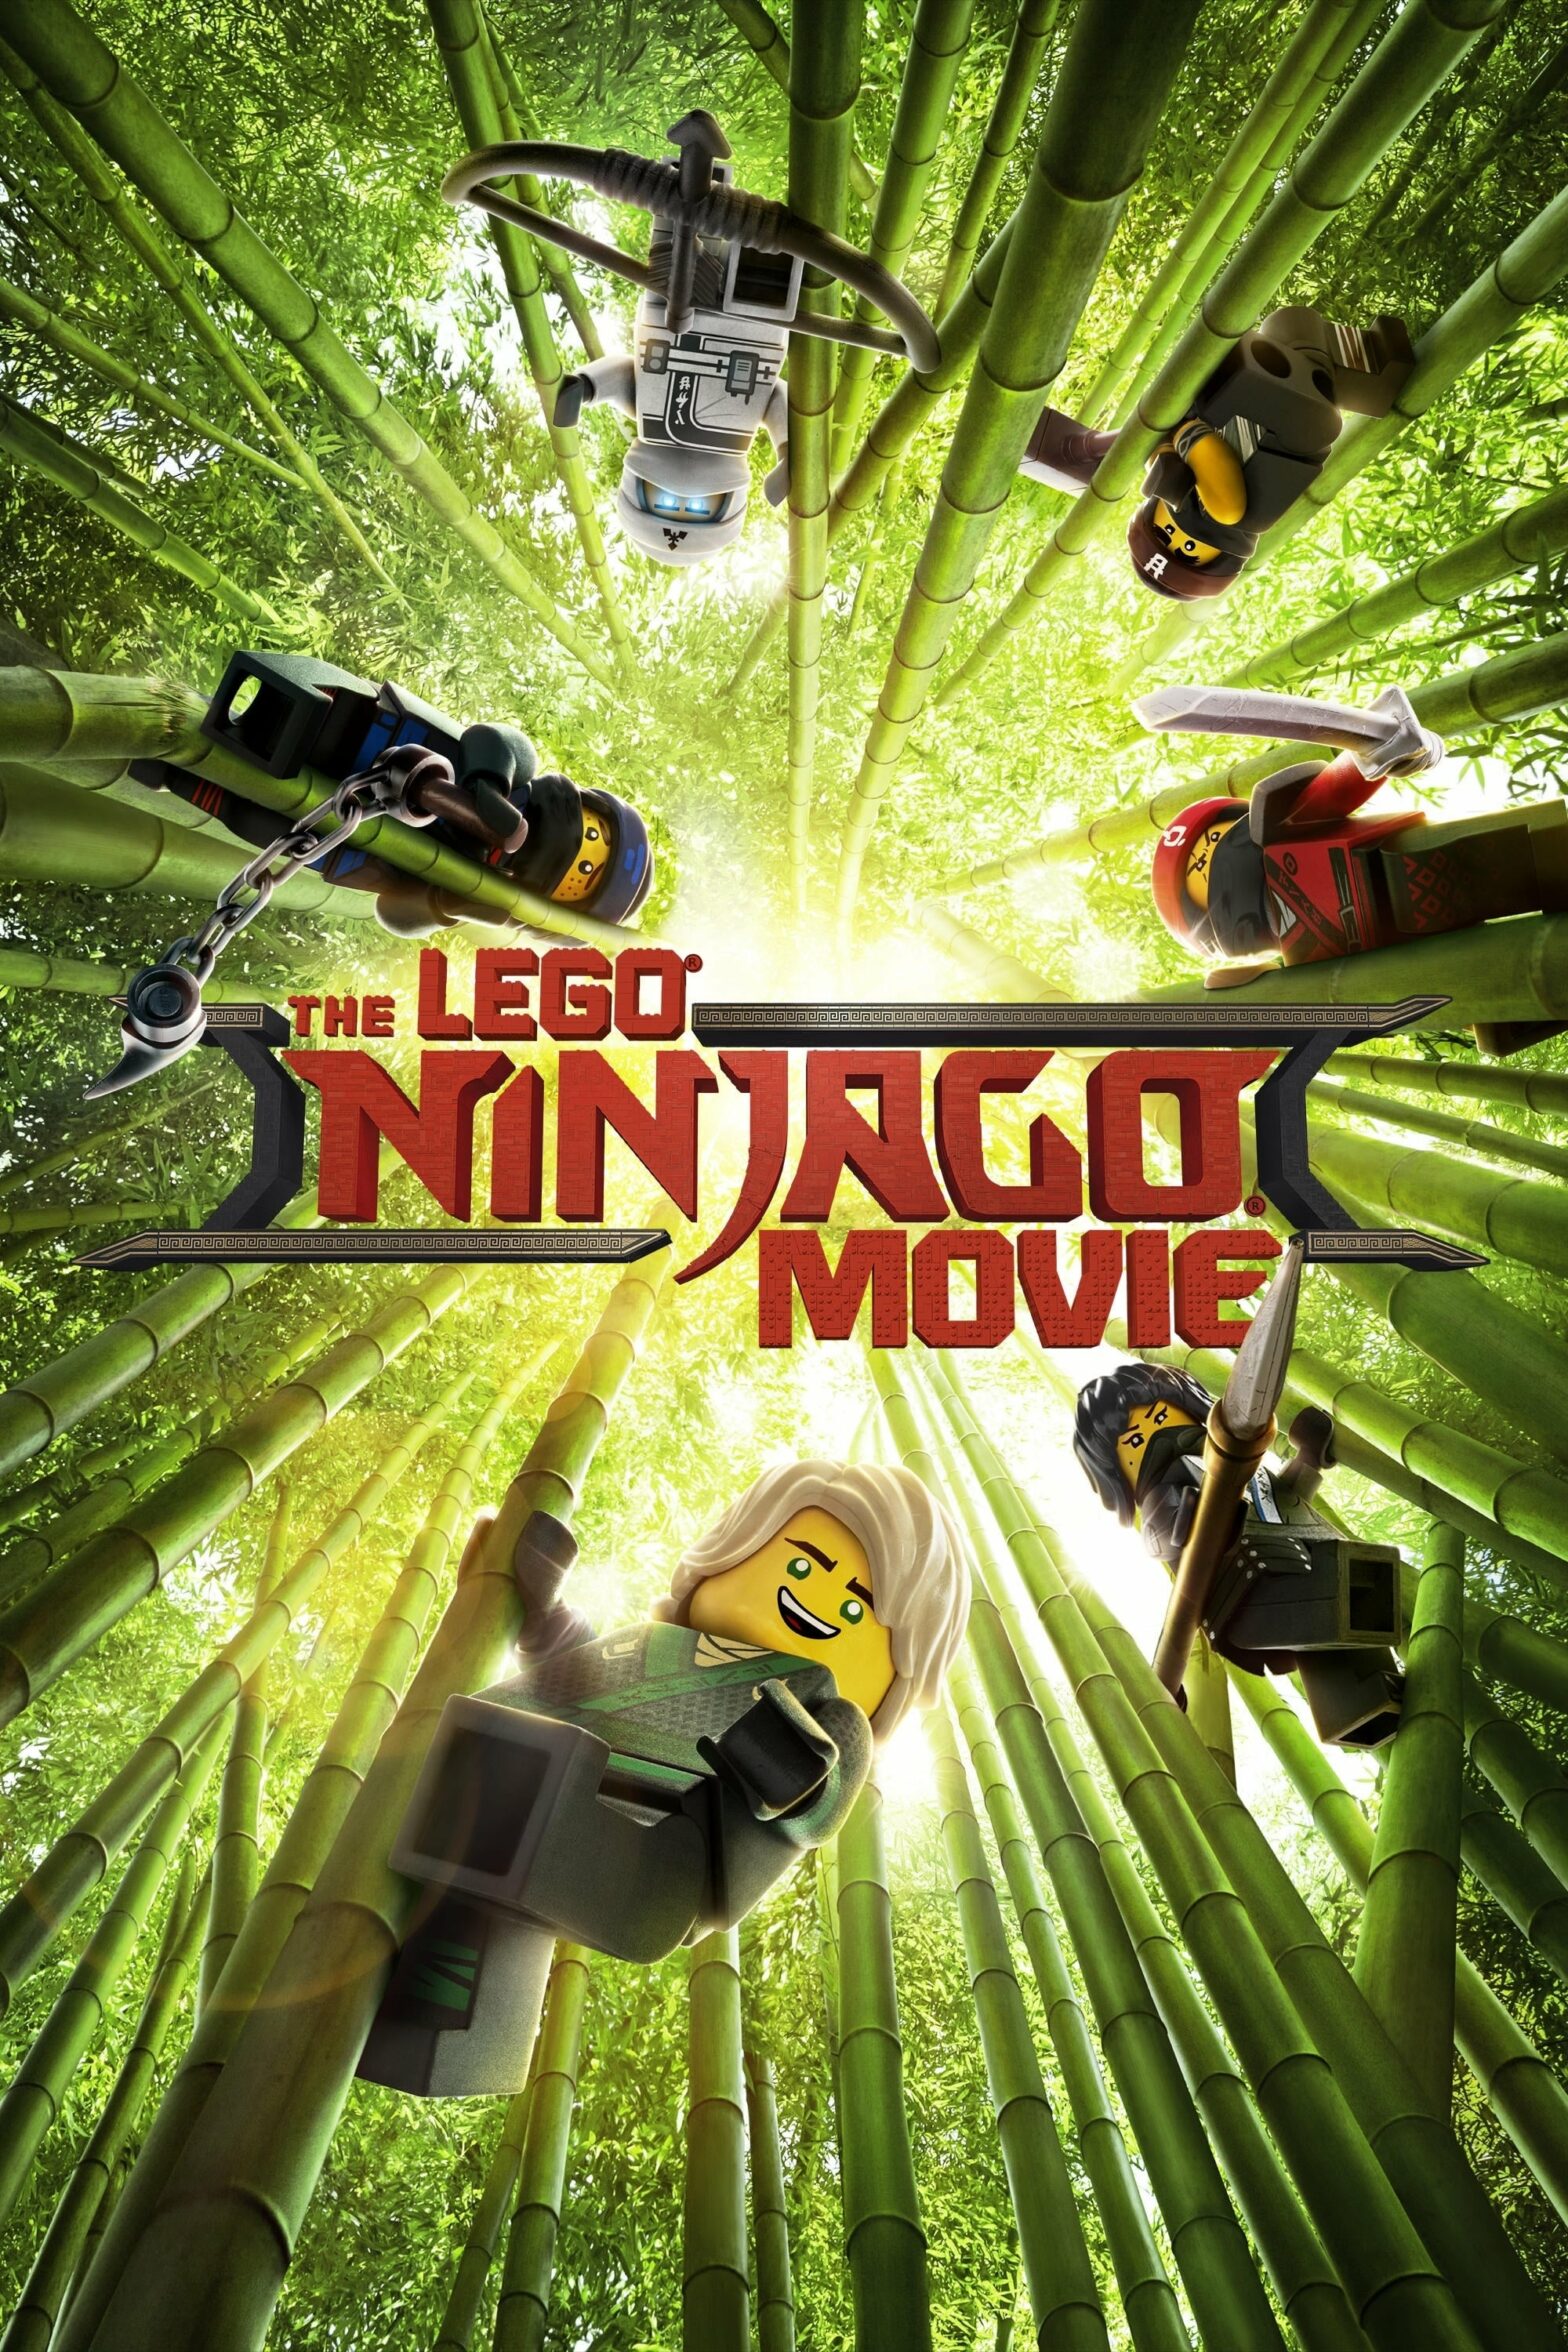 Poster for the movie "The Lego Ninjago Movie"